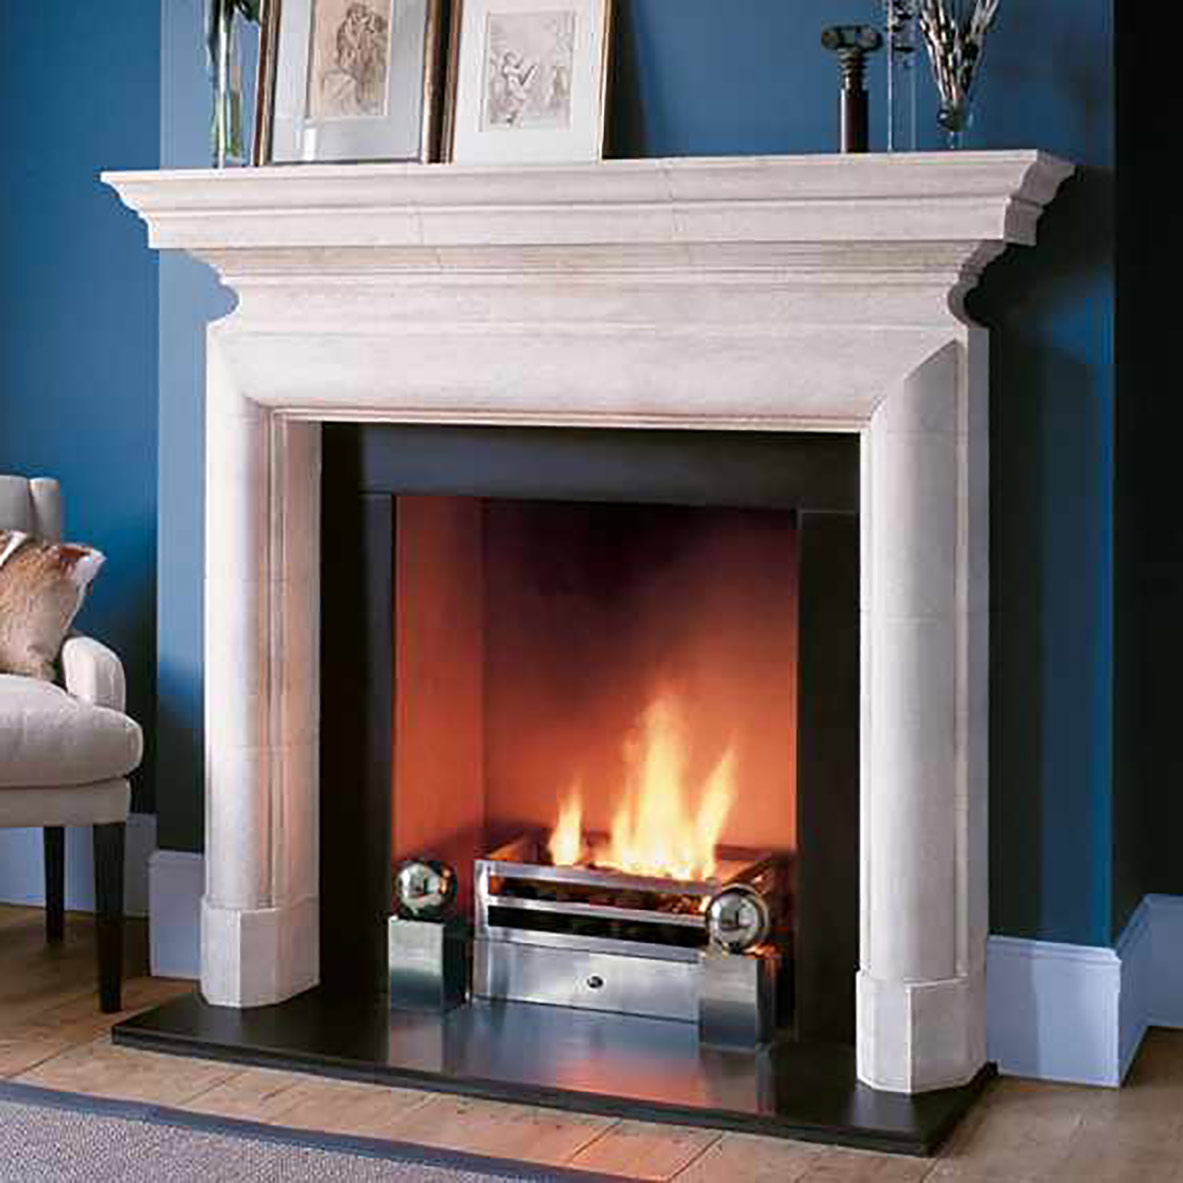 The Stirling fireplace